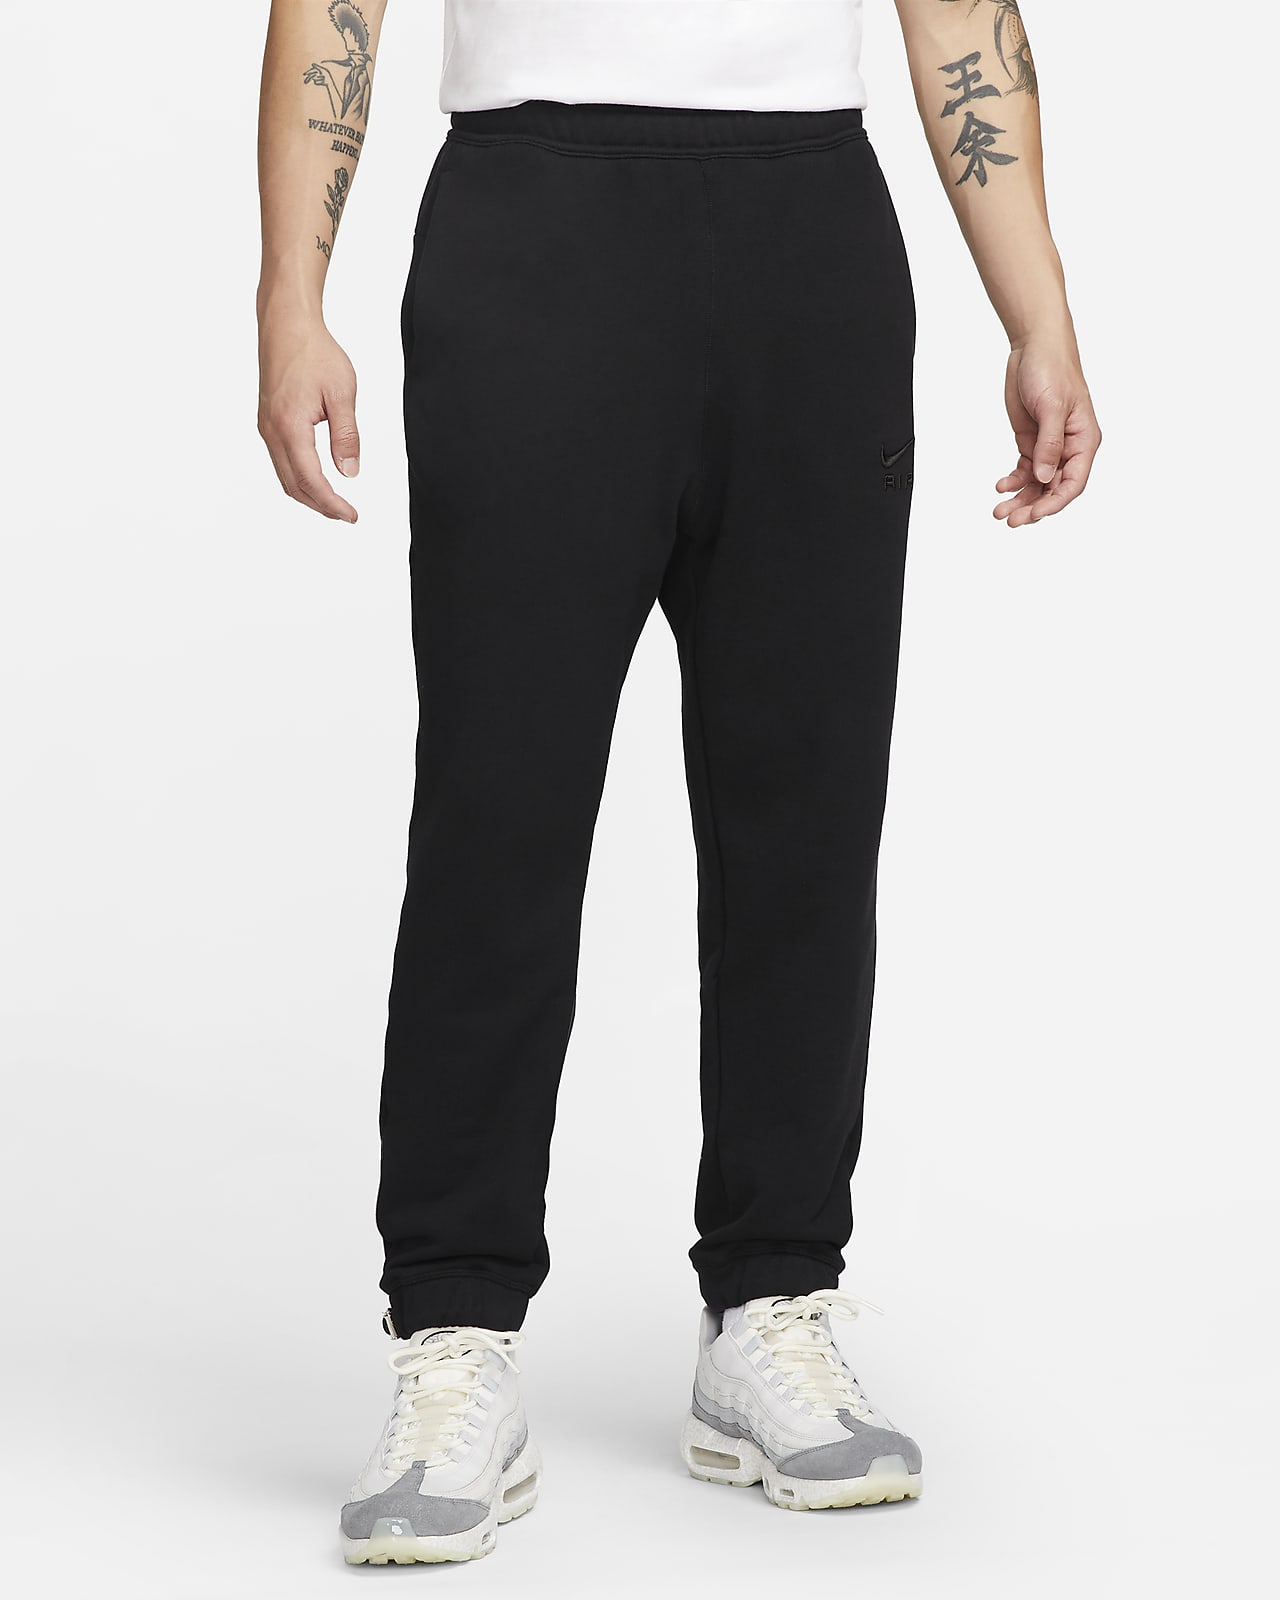 Nike Air Men's French Terry Joggers